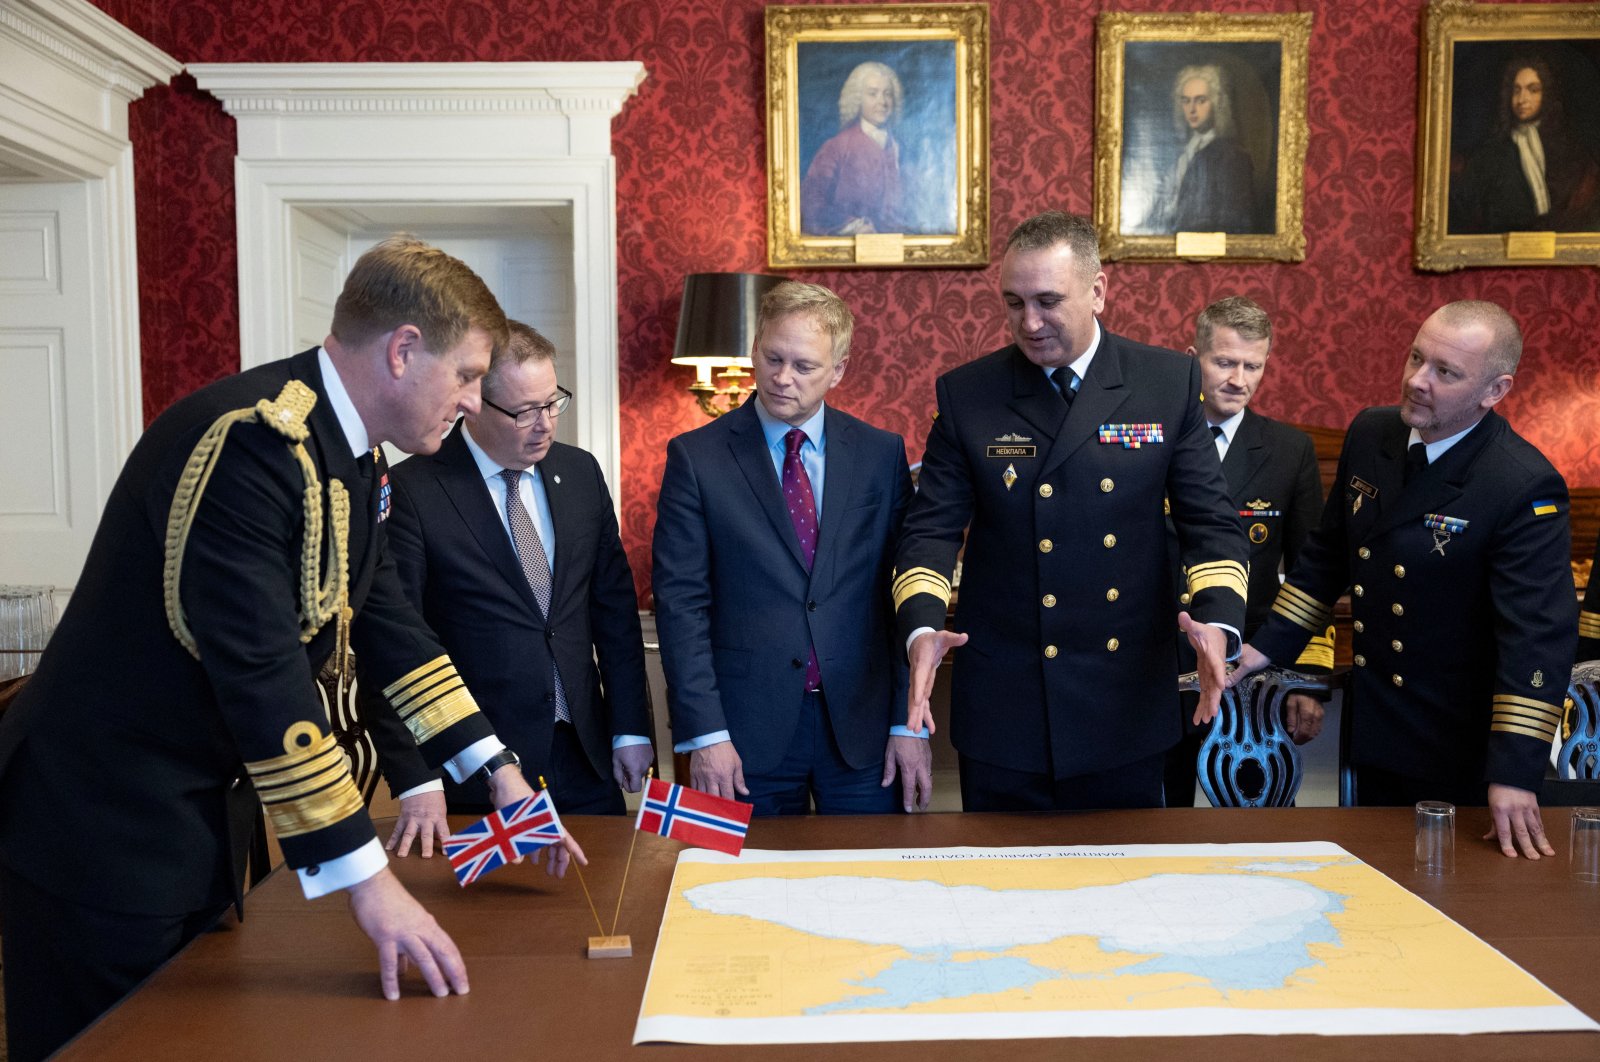 British Defense Minister Grant Shapps meets with Norwegian Defense Minister Bjorn Arild Gram and the Commander of the Ukrainian Navy Oleksiy Neizhpapa, as Britain said it would transfer two Royal Navy minehunter ships to the Ukrainian Navy, as it sets up a new maritime defence coalition alongside Norway, in London, Britain, Dec. 11, 2023. (Rosie Hallam/UK MOD/Handout via Reuters)